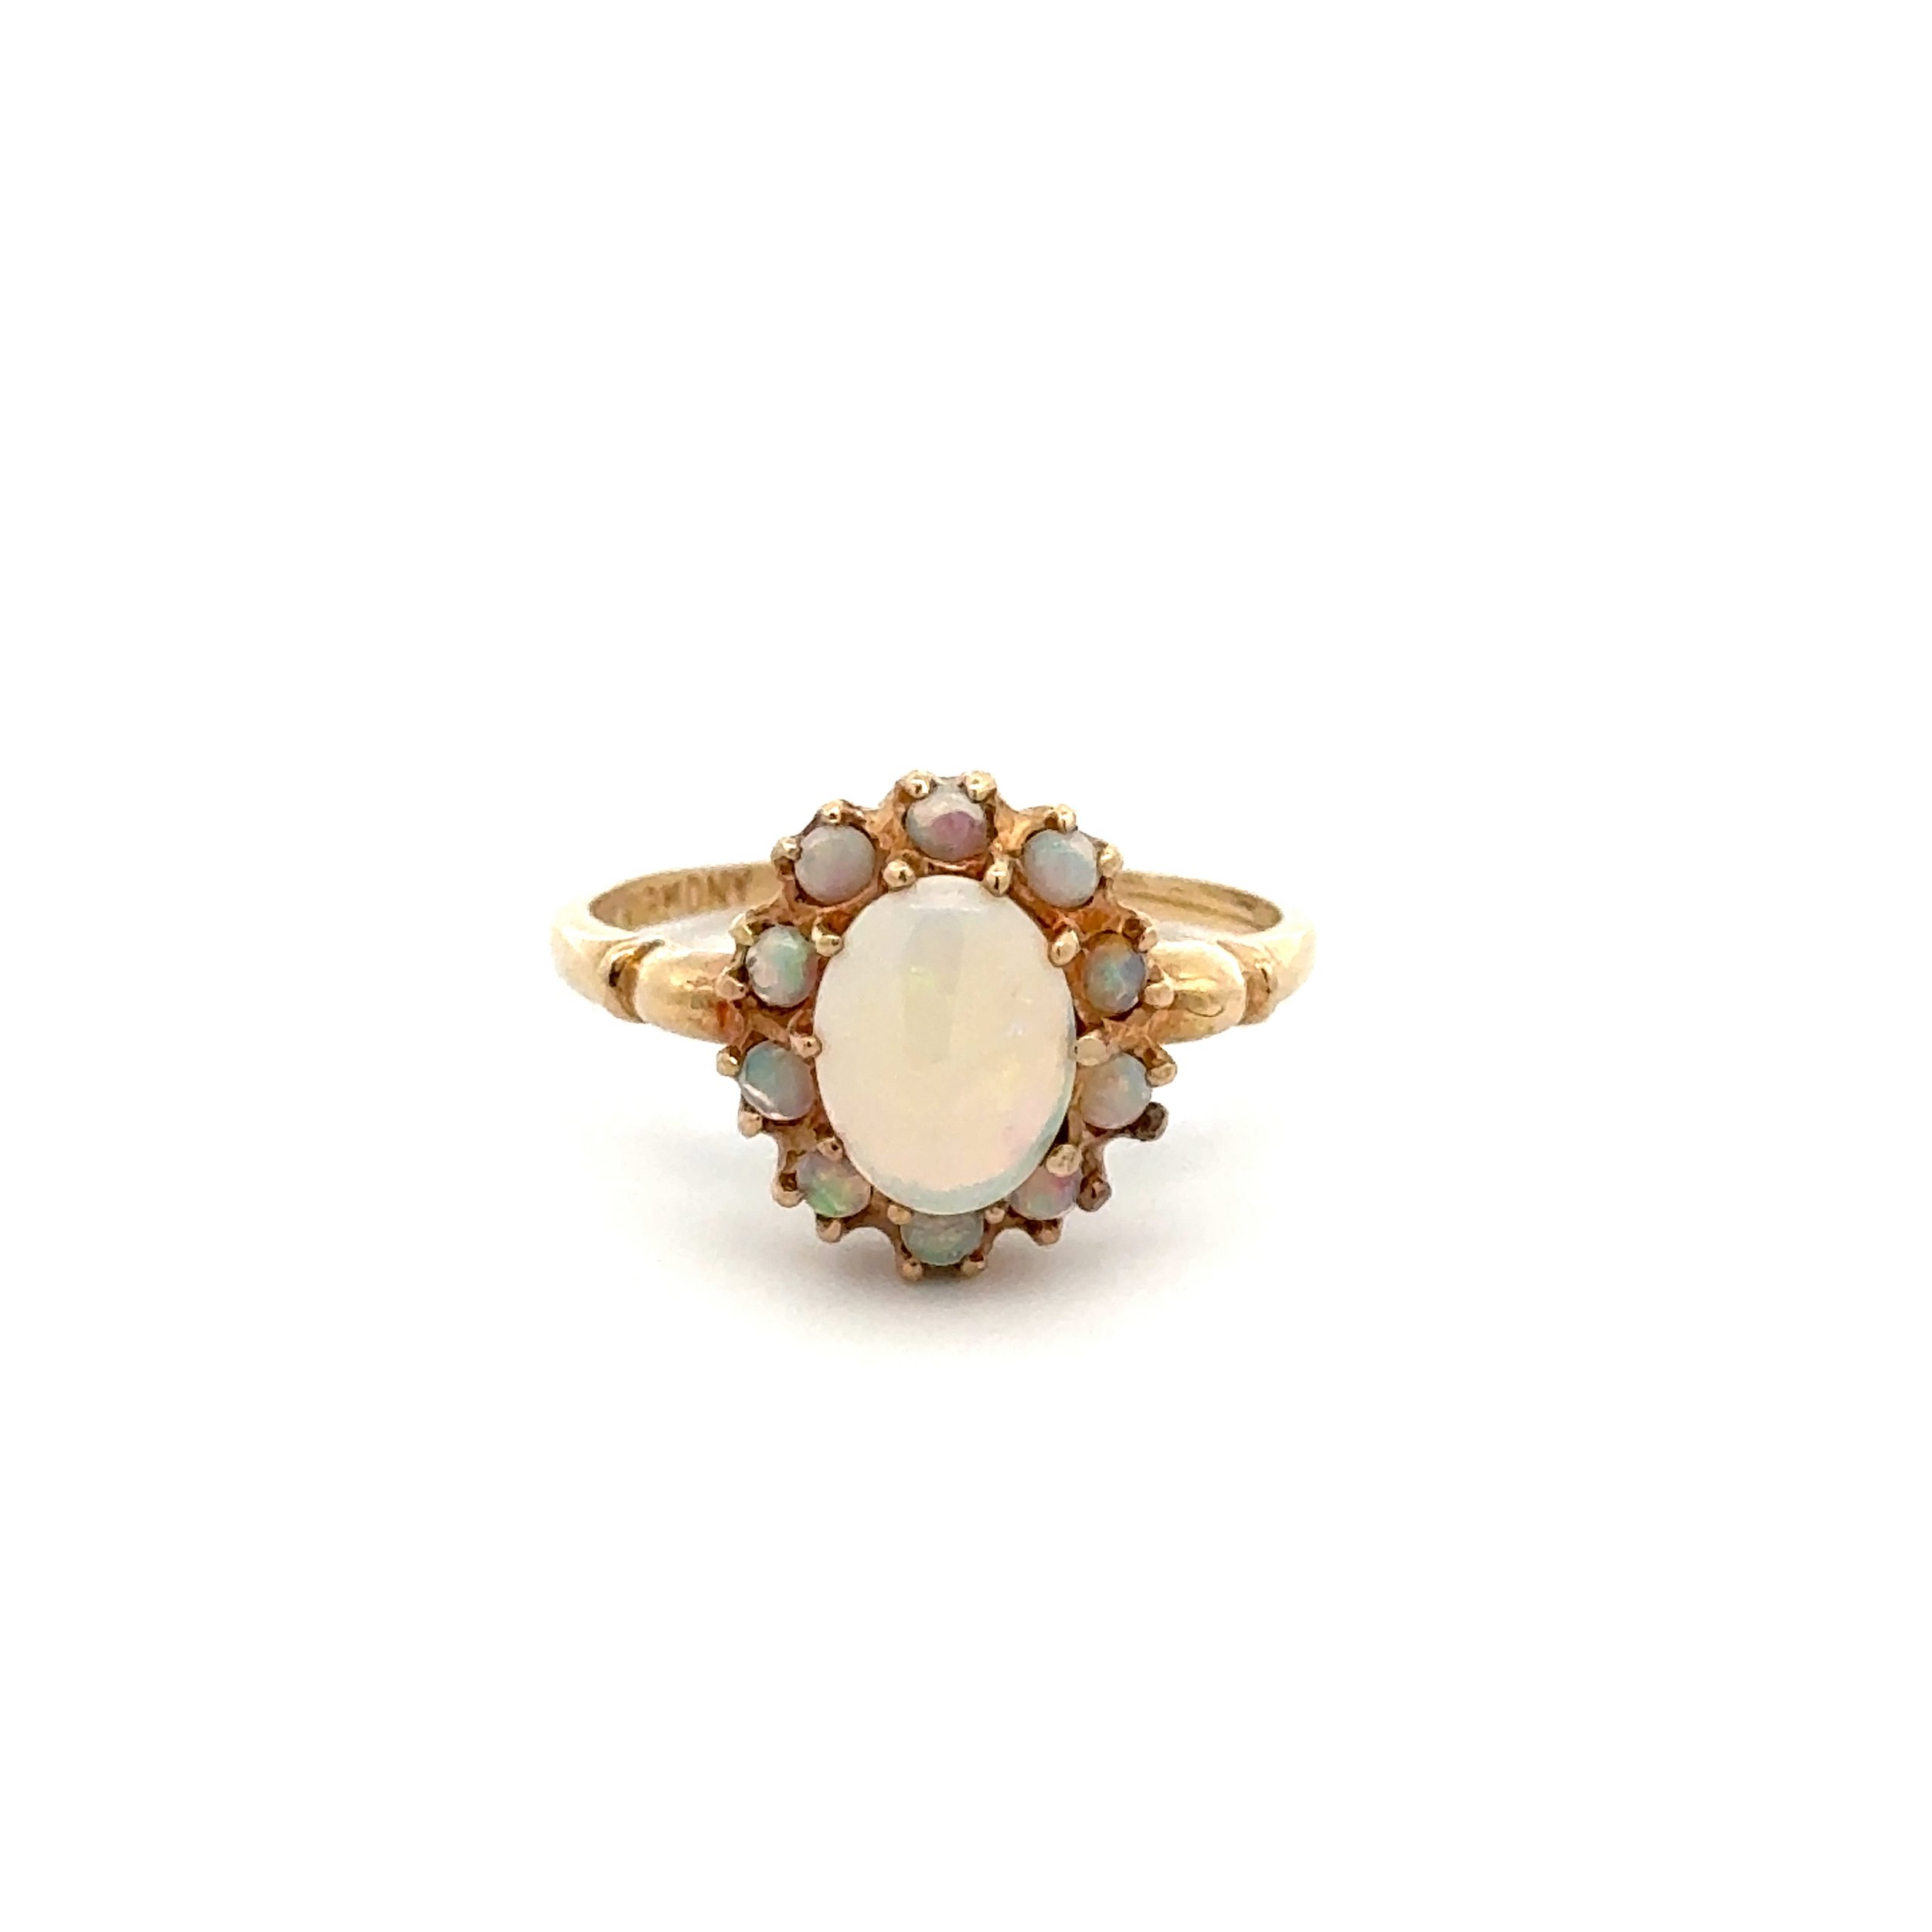 10K YG Victorian Revival 1.45tcw Oval Opal Halo Ring 2.0g, s7